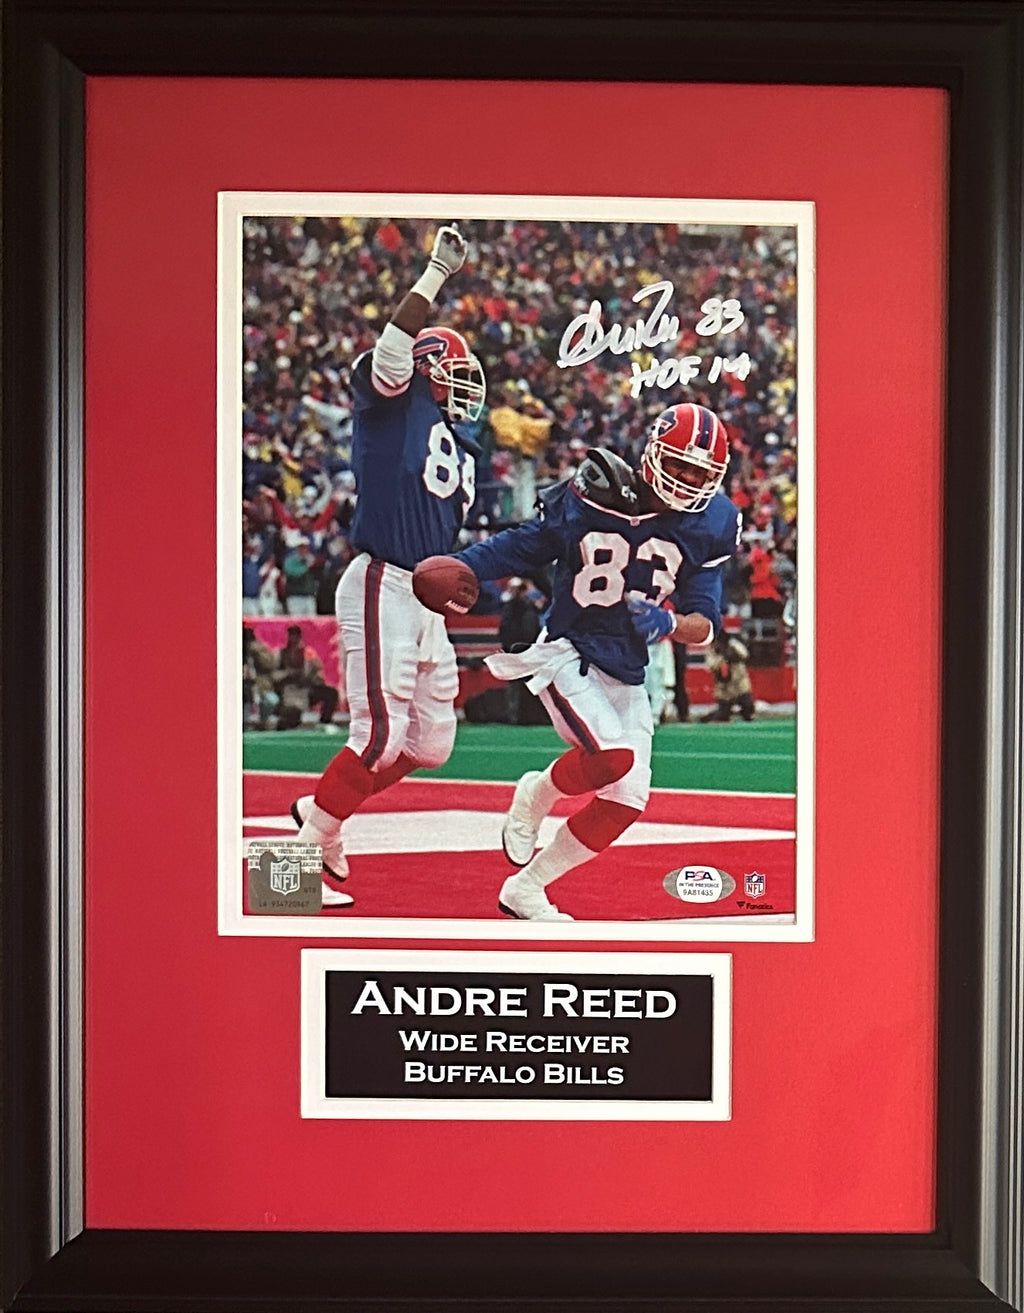 Andre Reed autographed signed inscribed framed 8x10 photo NFL Buffalo Bills PSA